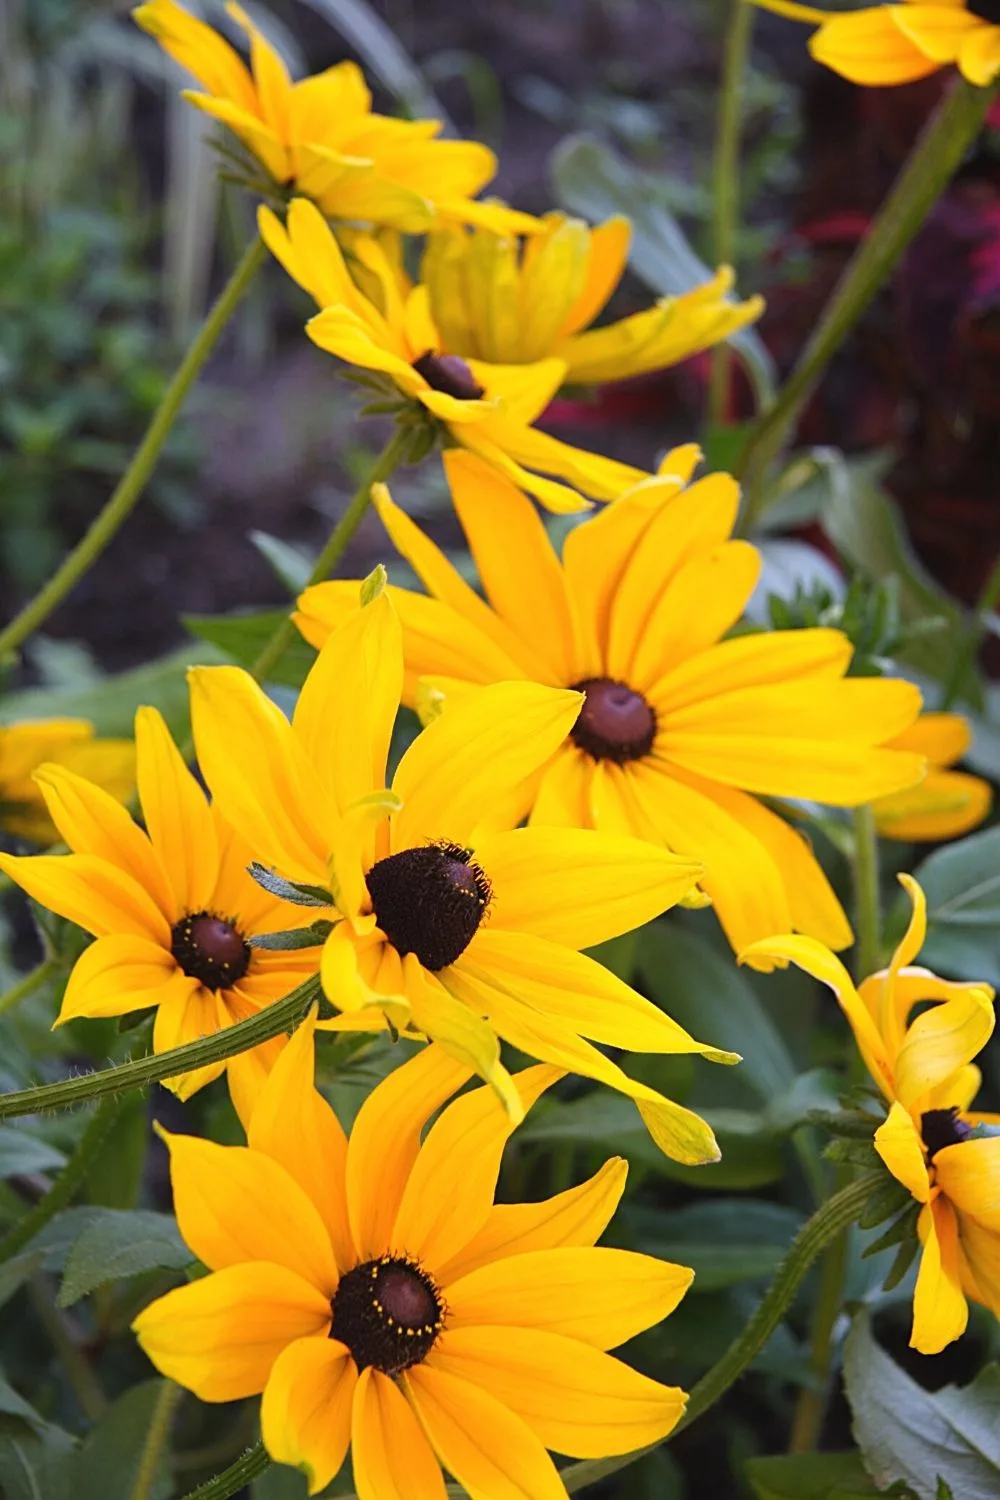 Black-eyed Susan, known for its stunning yellow flowers, can be grown in pots on an east-facing balcony